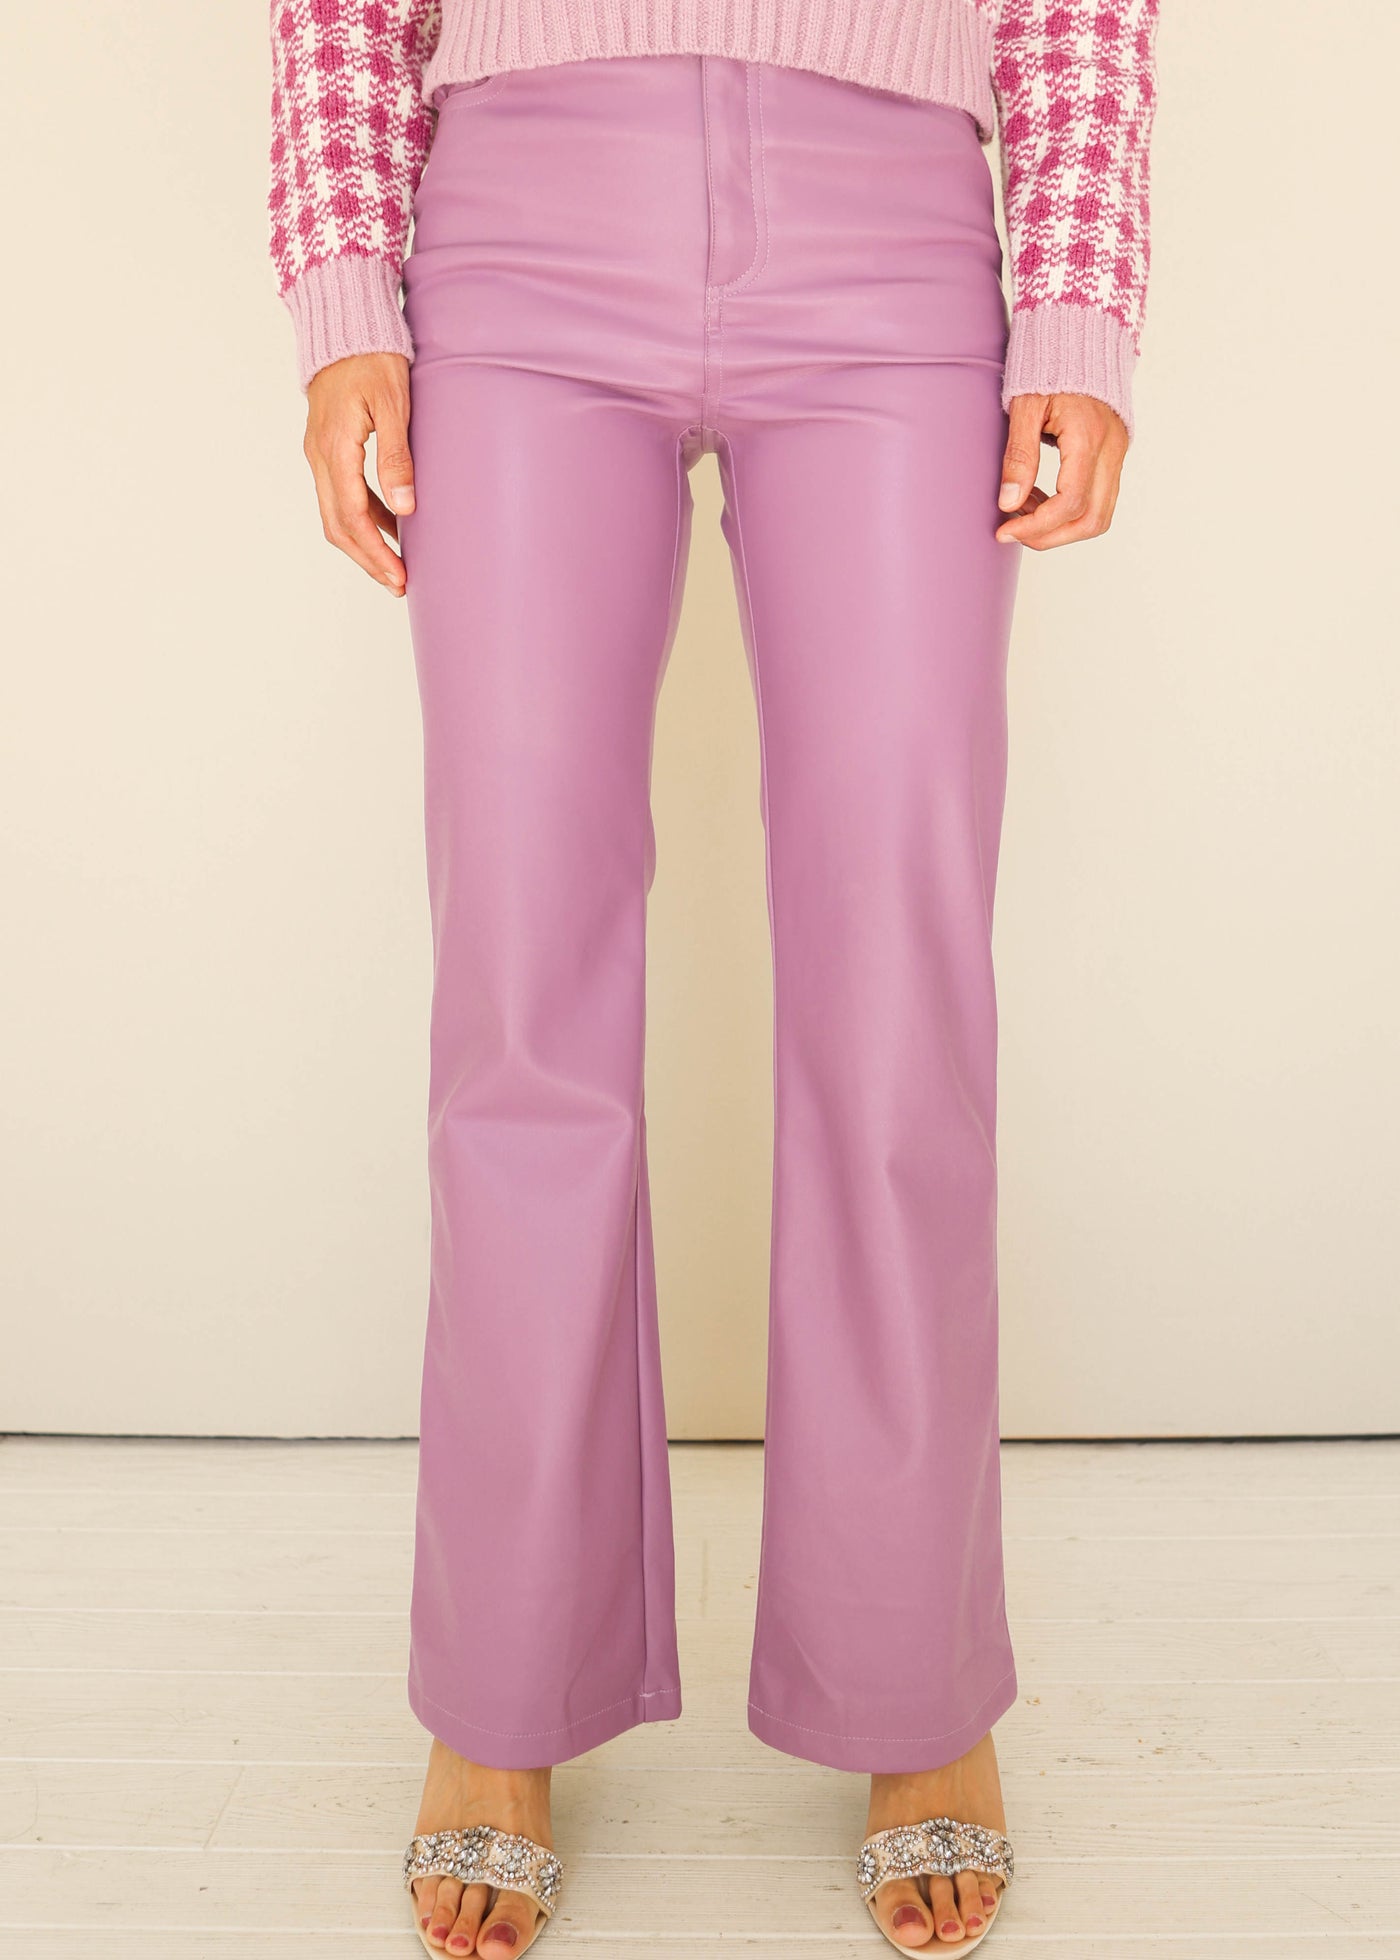 Friday Night Lilac Leather Pants